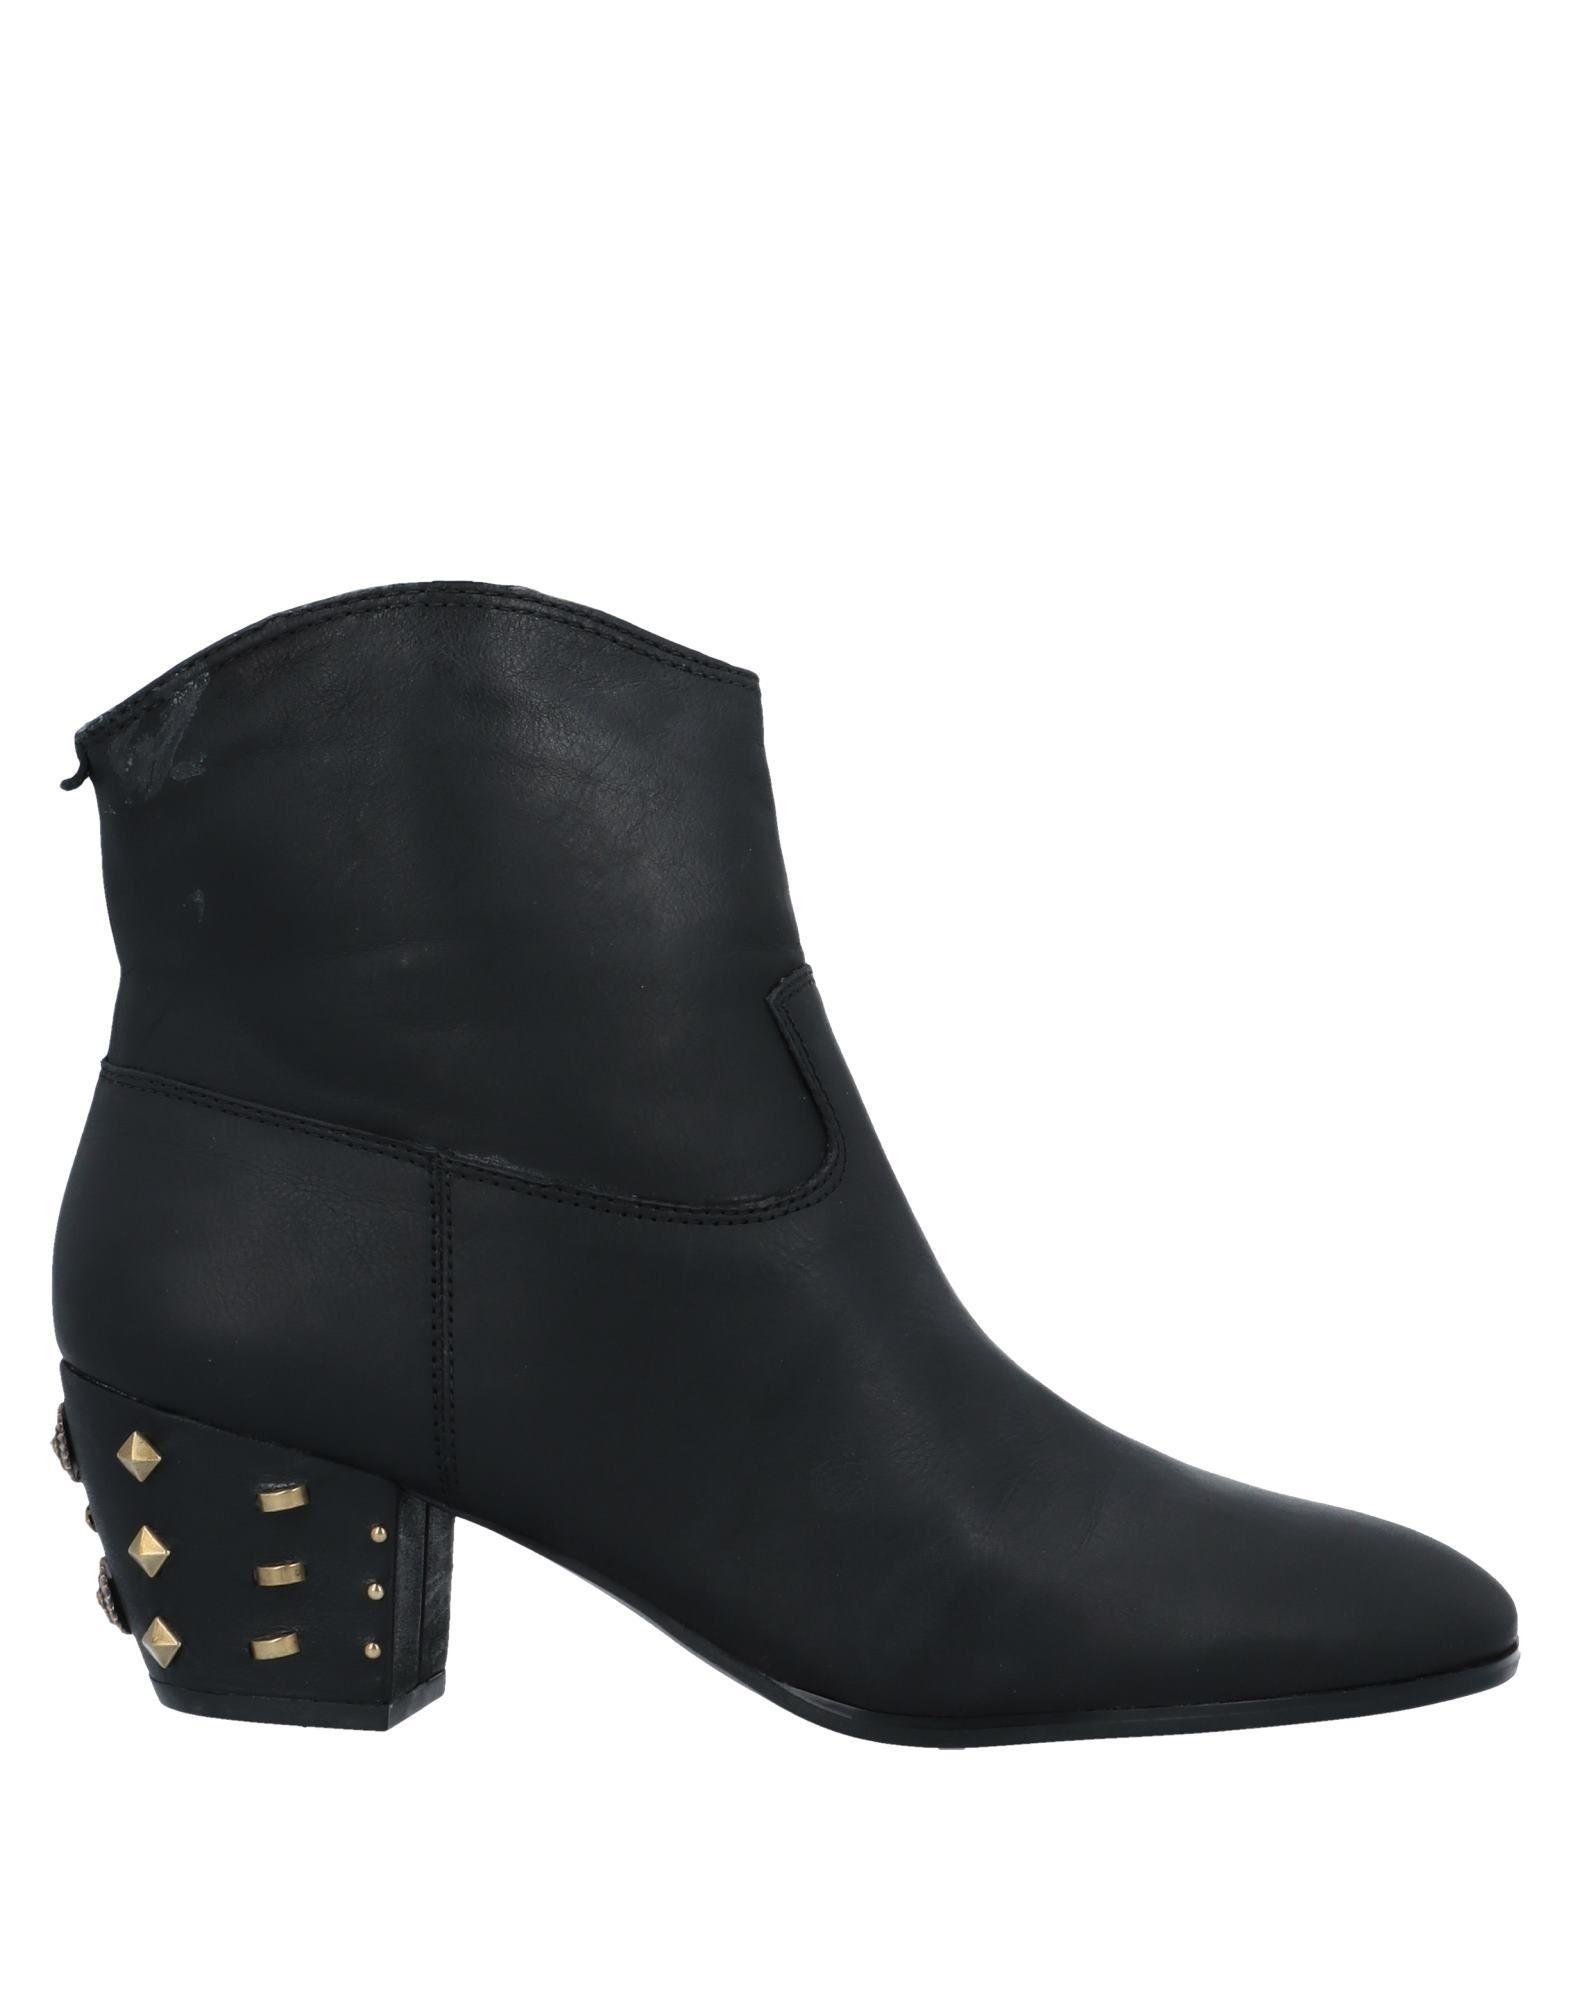 MICHAEL Michael Kors Ankle Boots in Black - Lyst